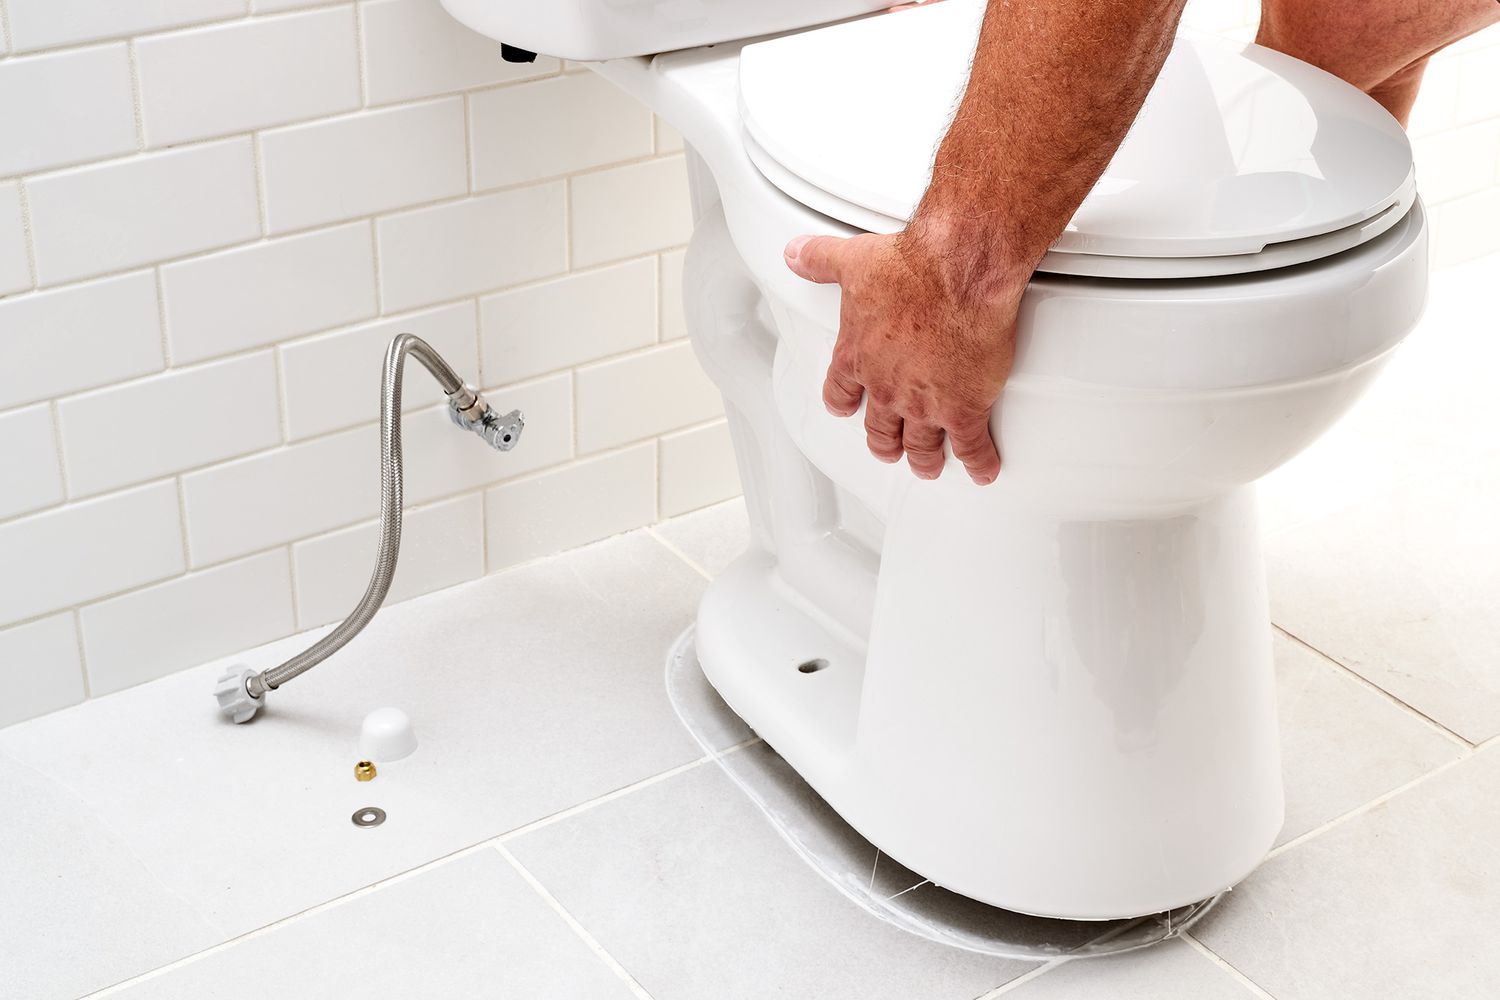 How To Remove A Toilet From The Floor